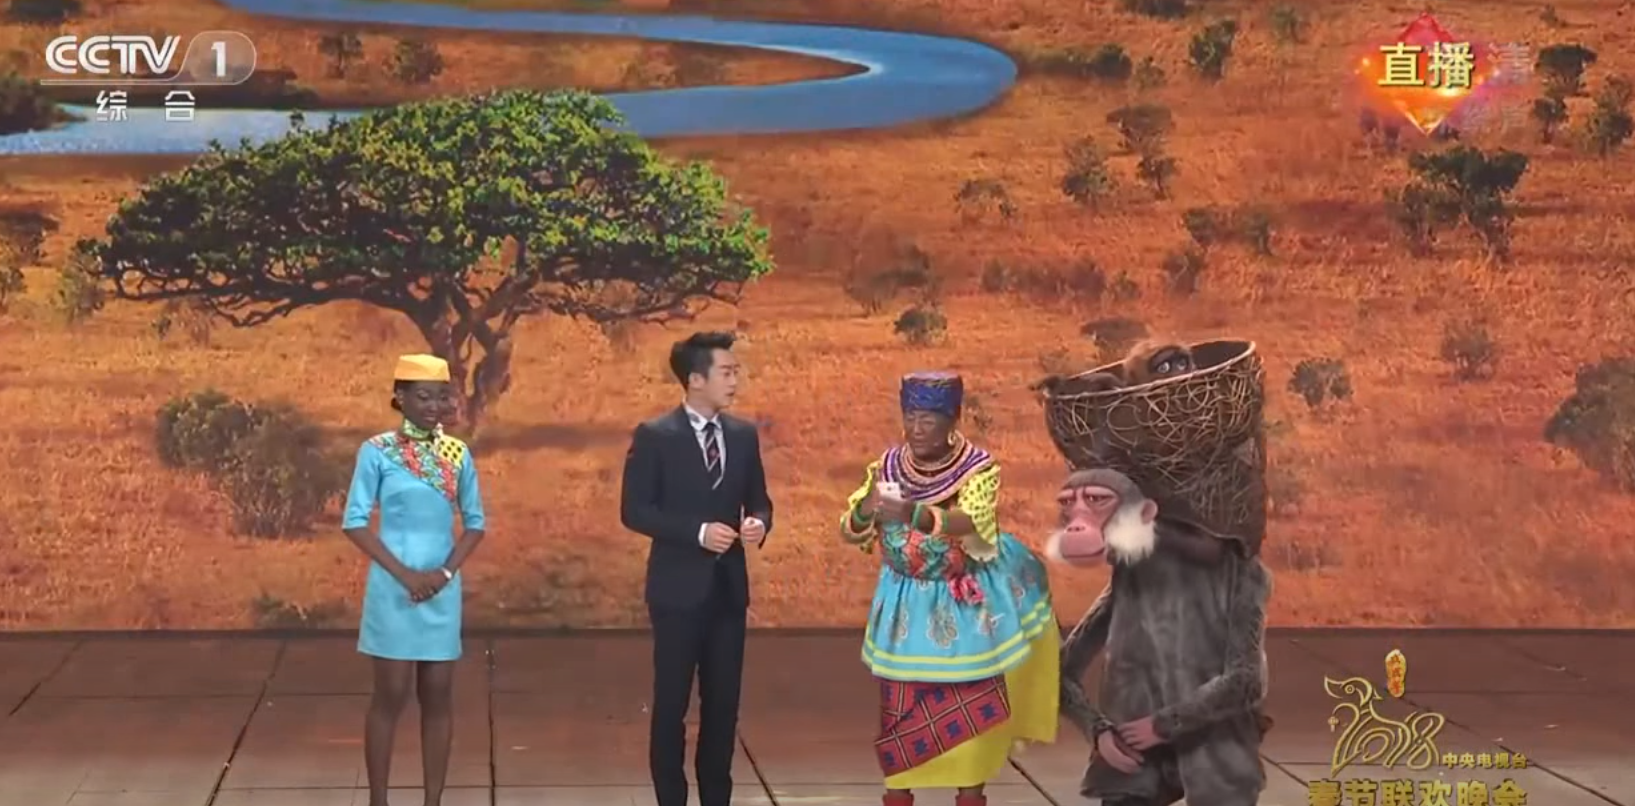 Chinese actors dressed in blackface during a CCTV performance on Lunar New Year. (Screengrab via YouTube)